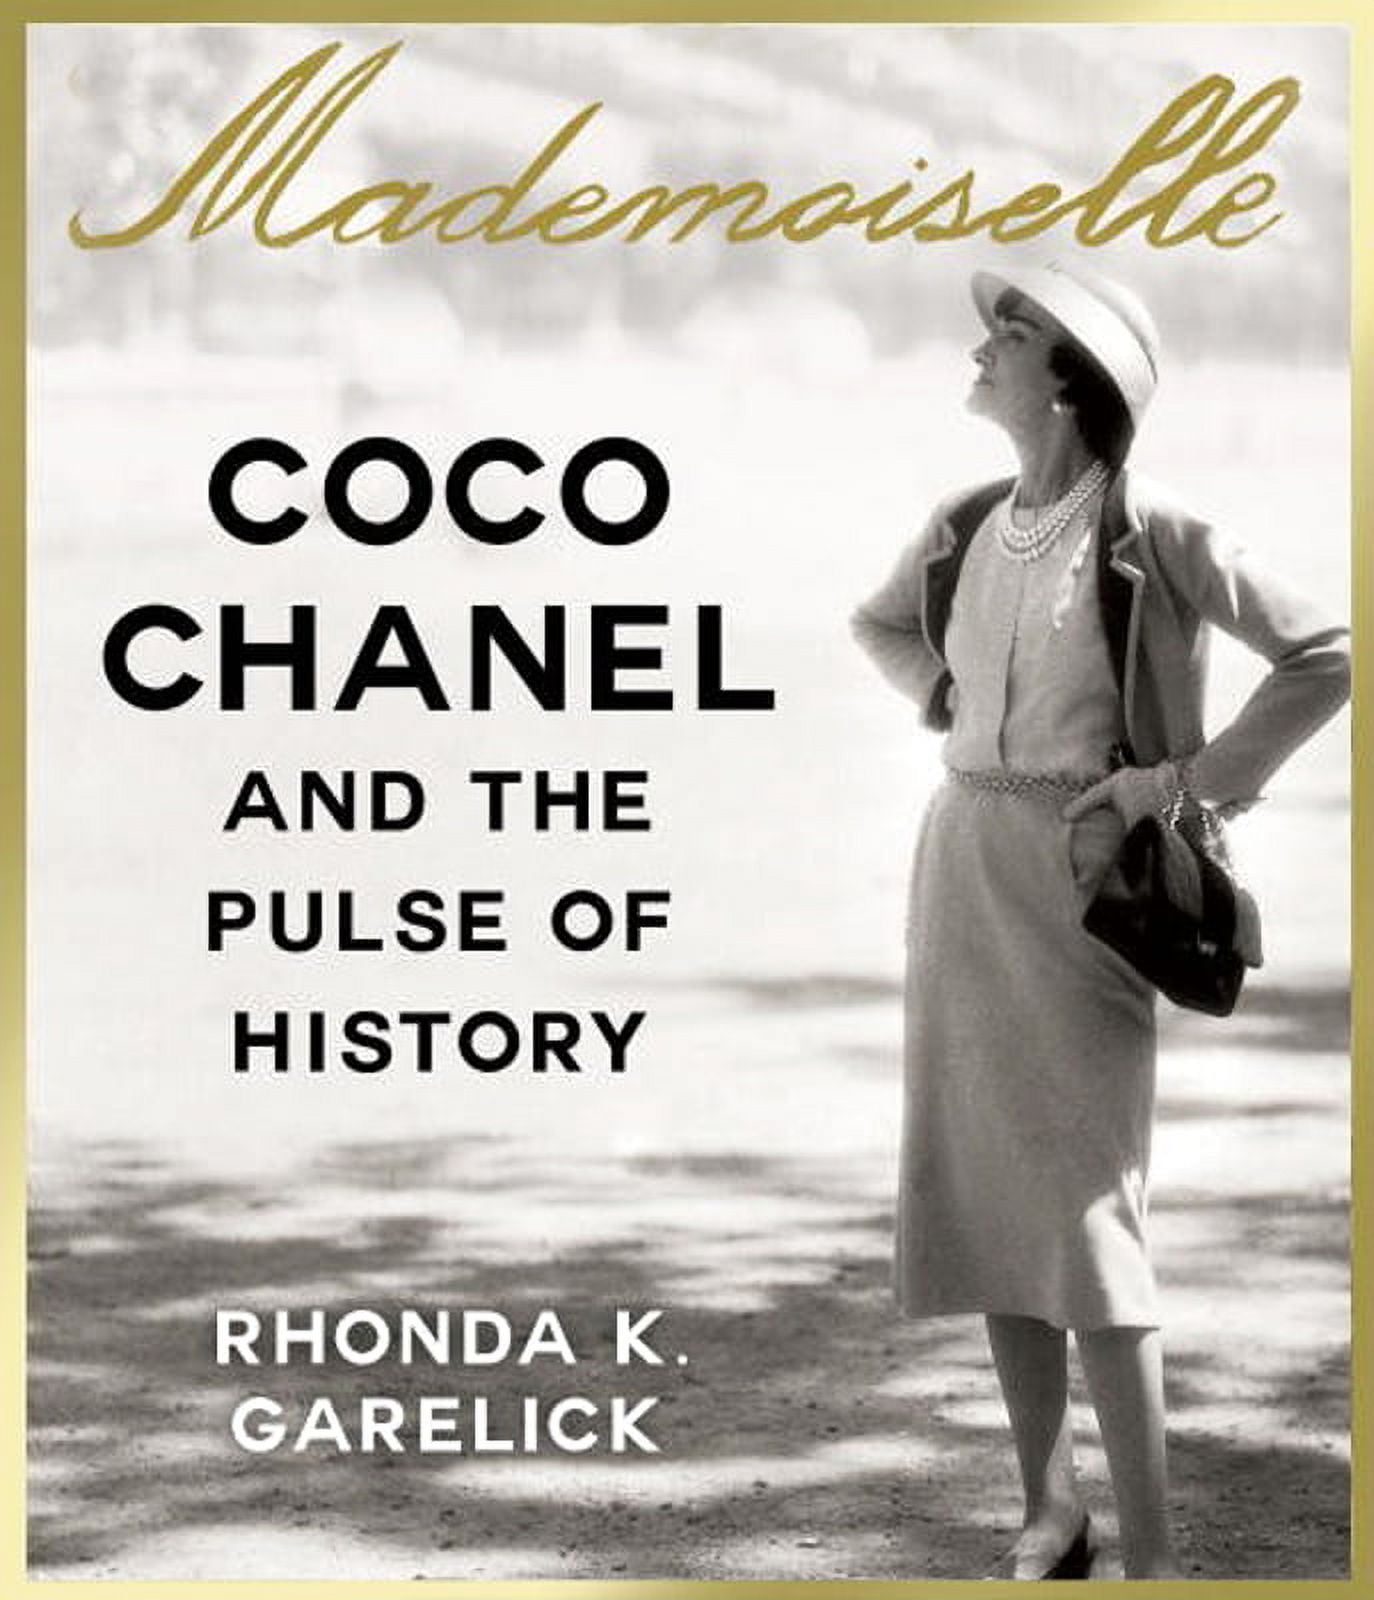 Currently Reading – Mademoiselle: Coco Chanel and the Pulse of